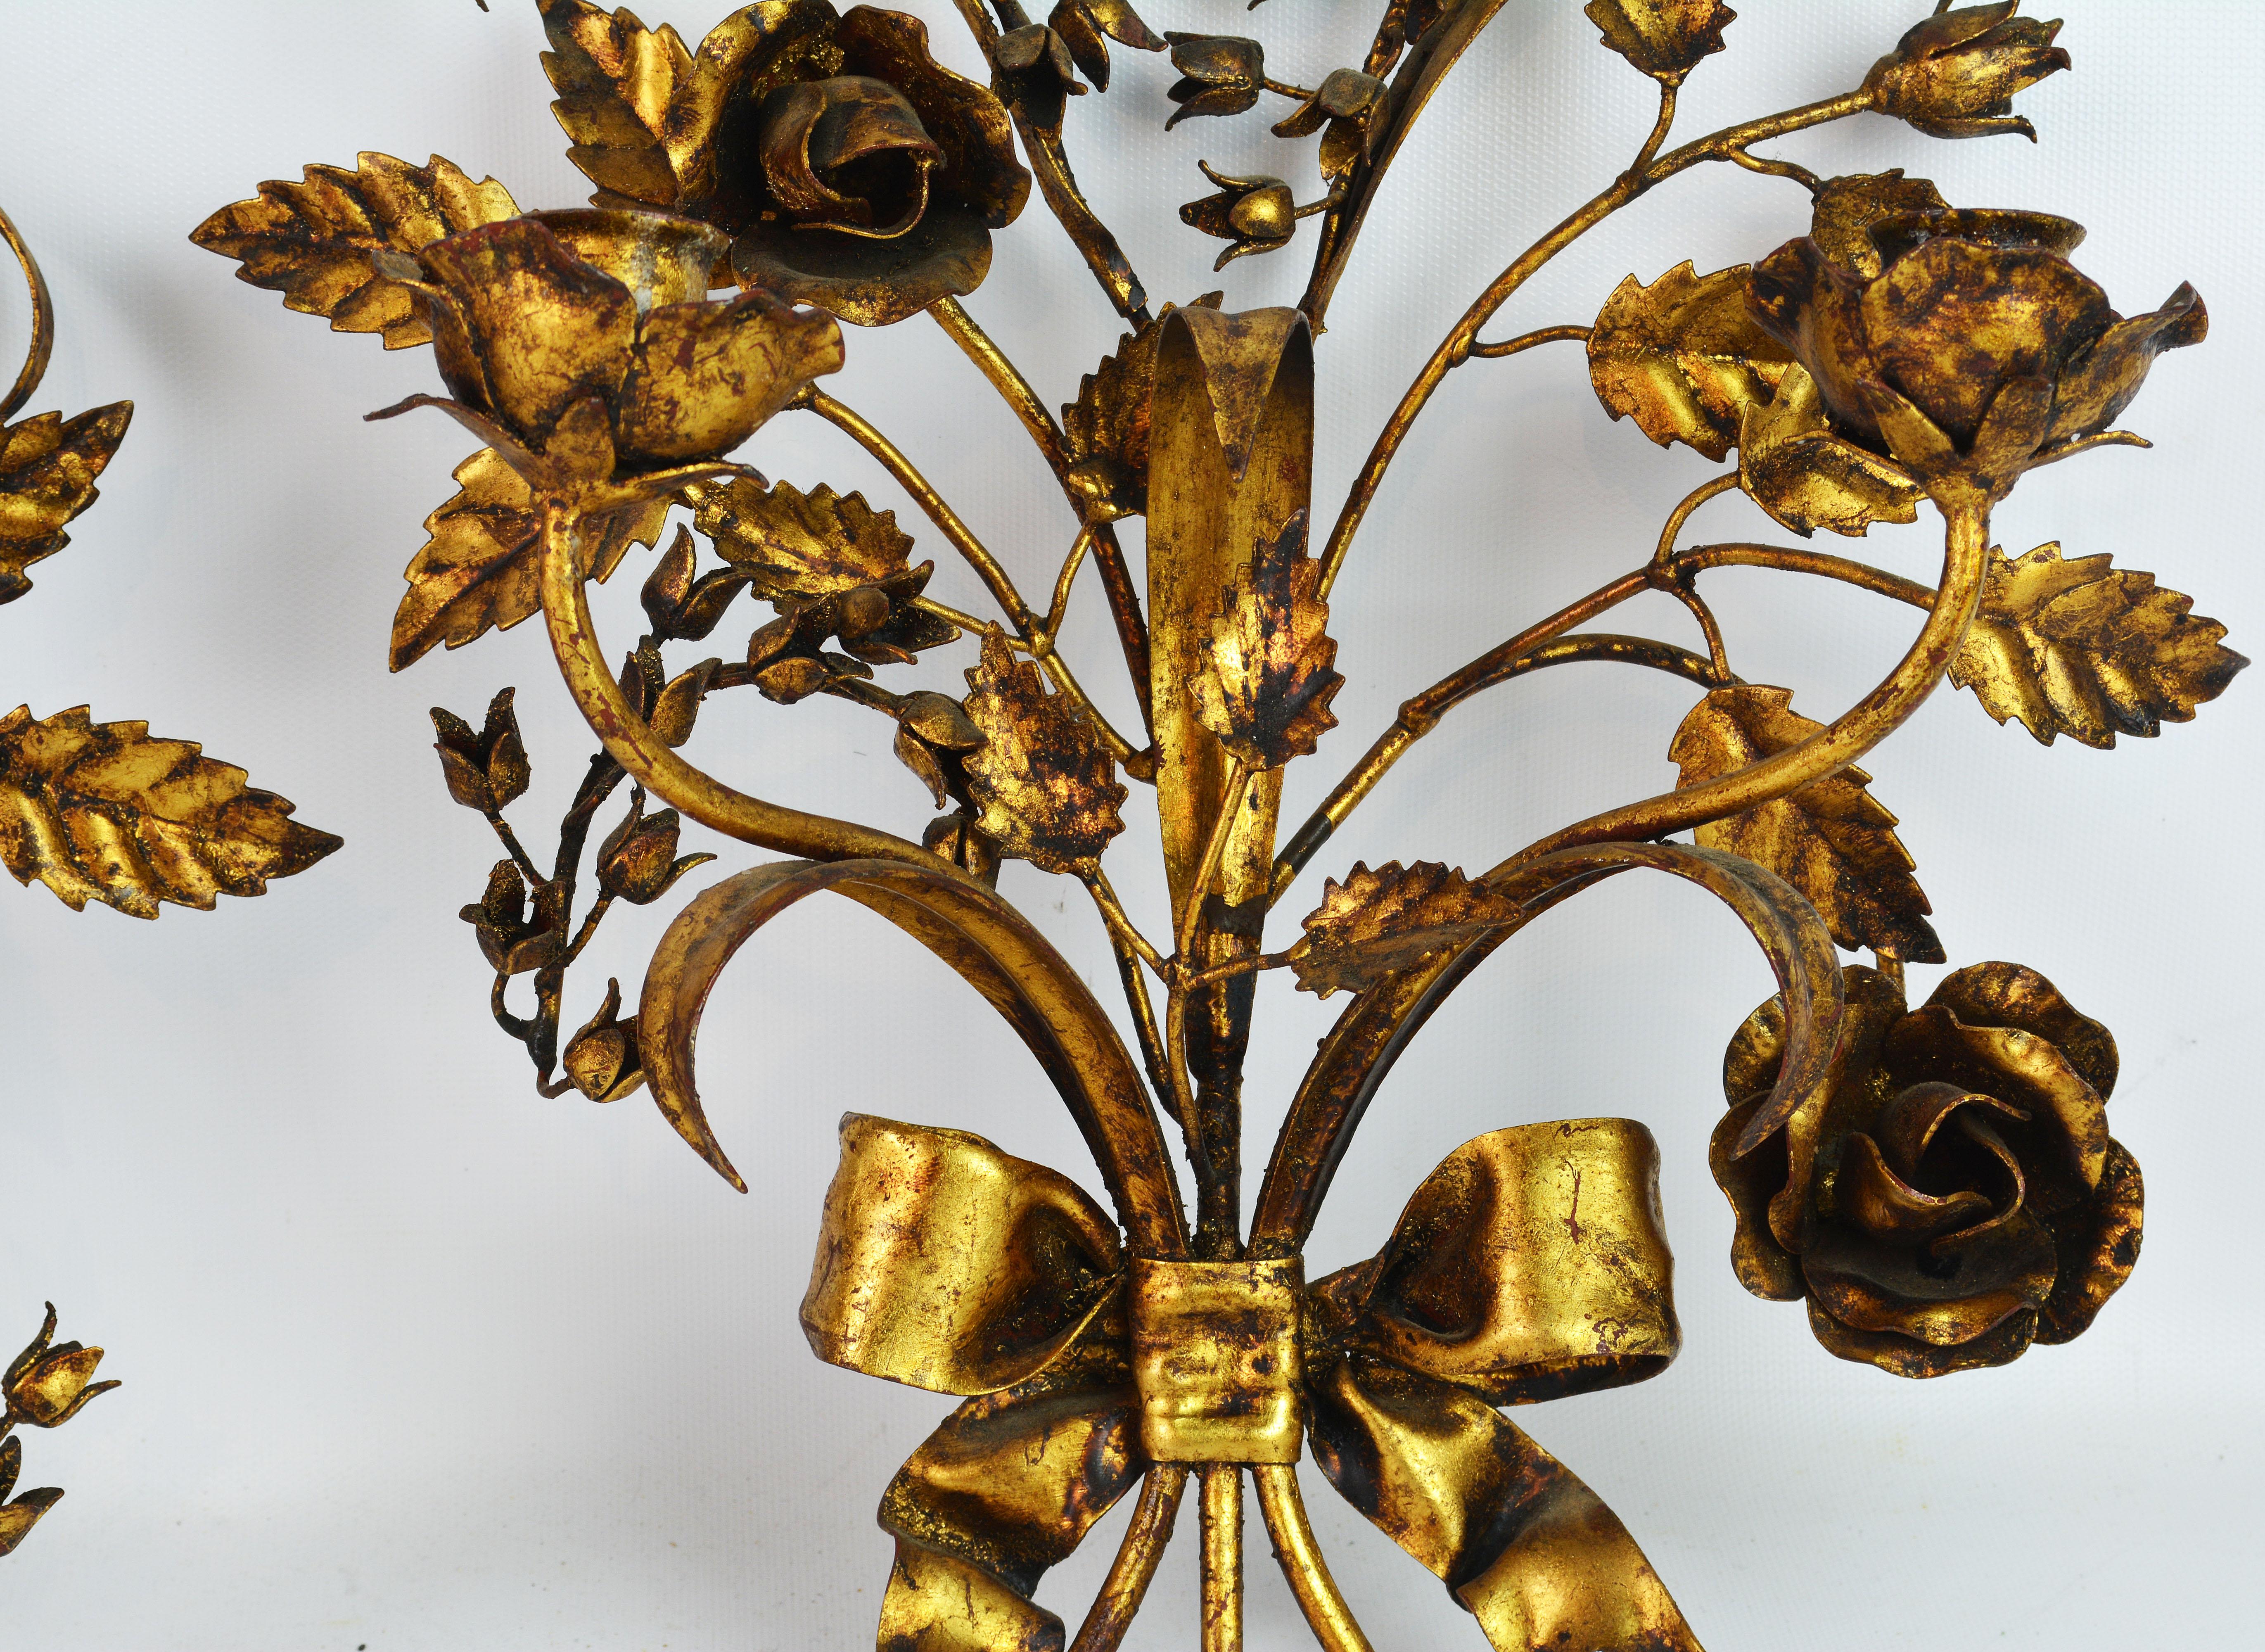 This is a very decorative pair of Italian mid-20th century gilt tole sconces designed like a bouquet of flowers and leaves held together by ribbons and featuring two candle holders each.